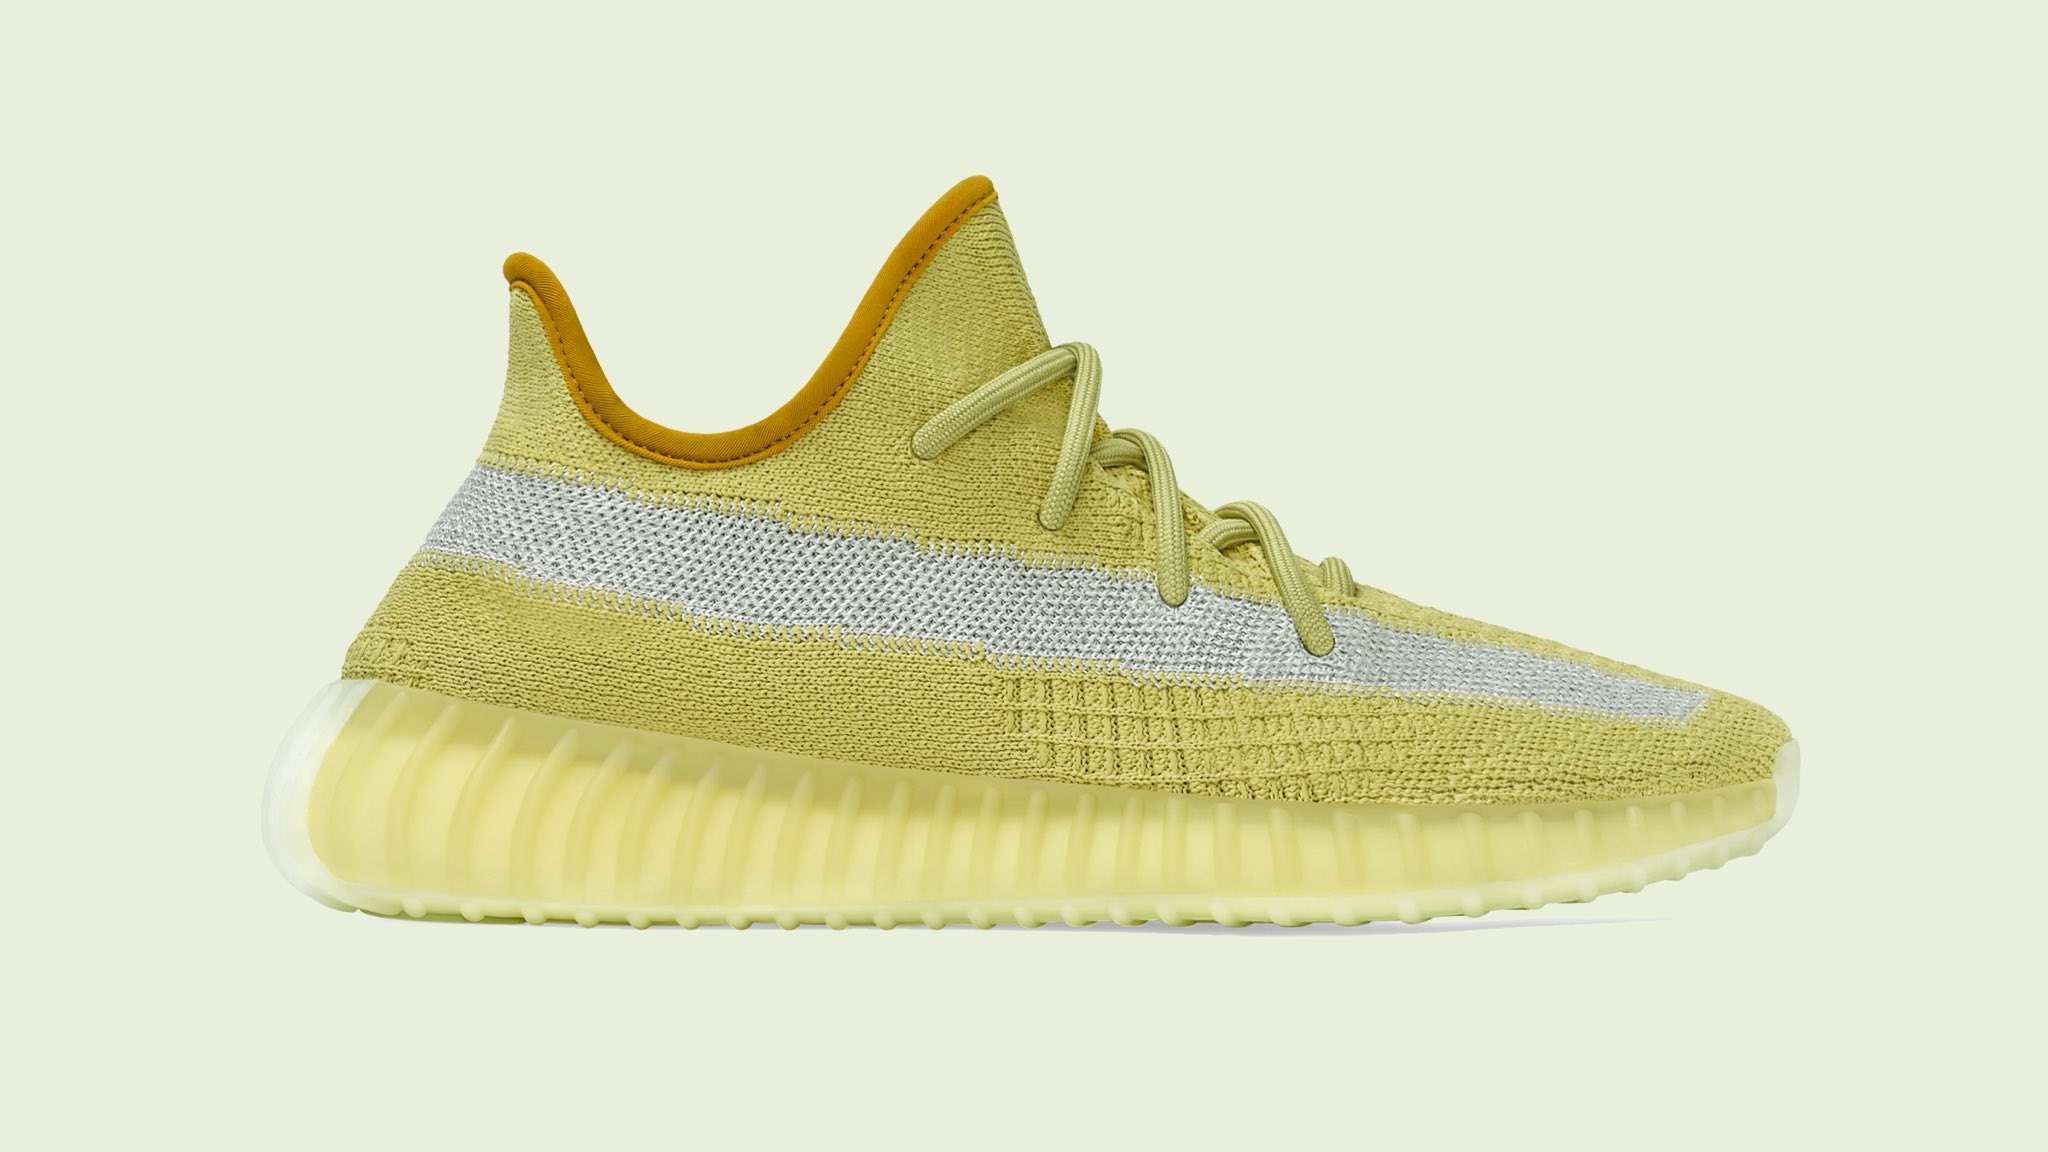 The Adidas Yeezy Boost 350 V2 “Marsh” Releases On Saturday